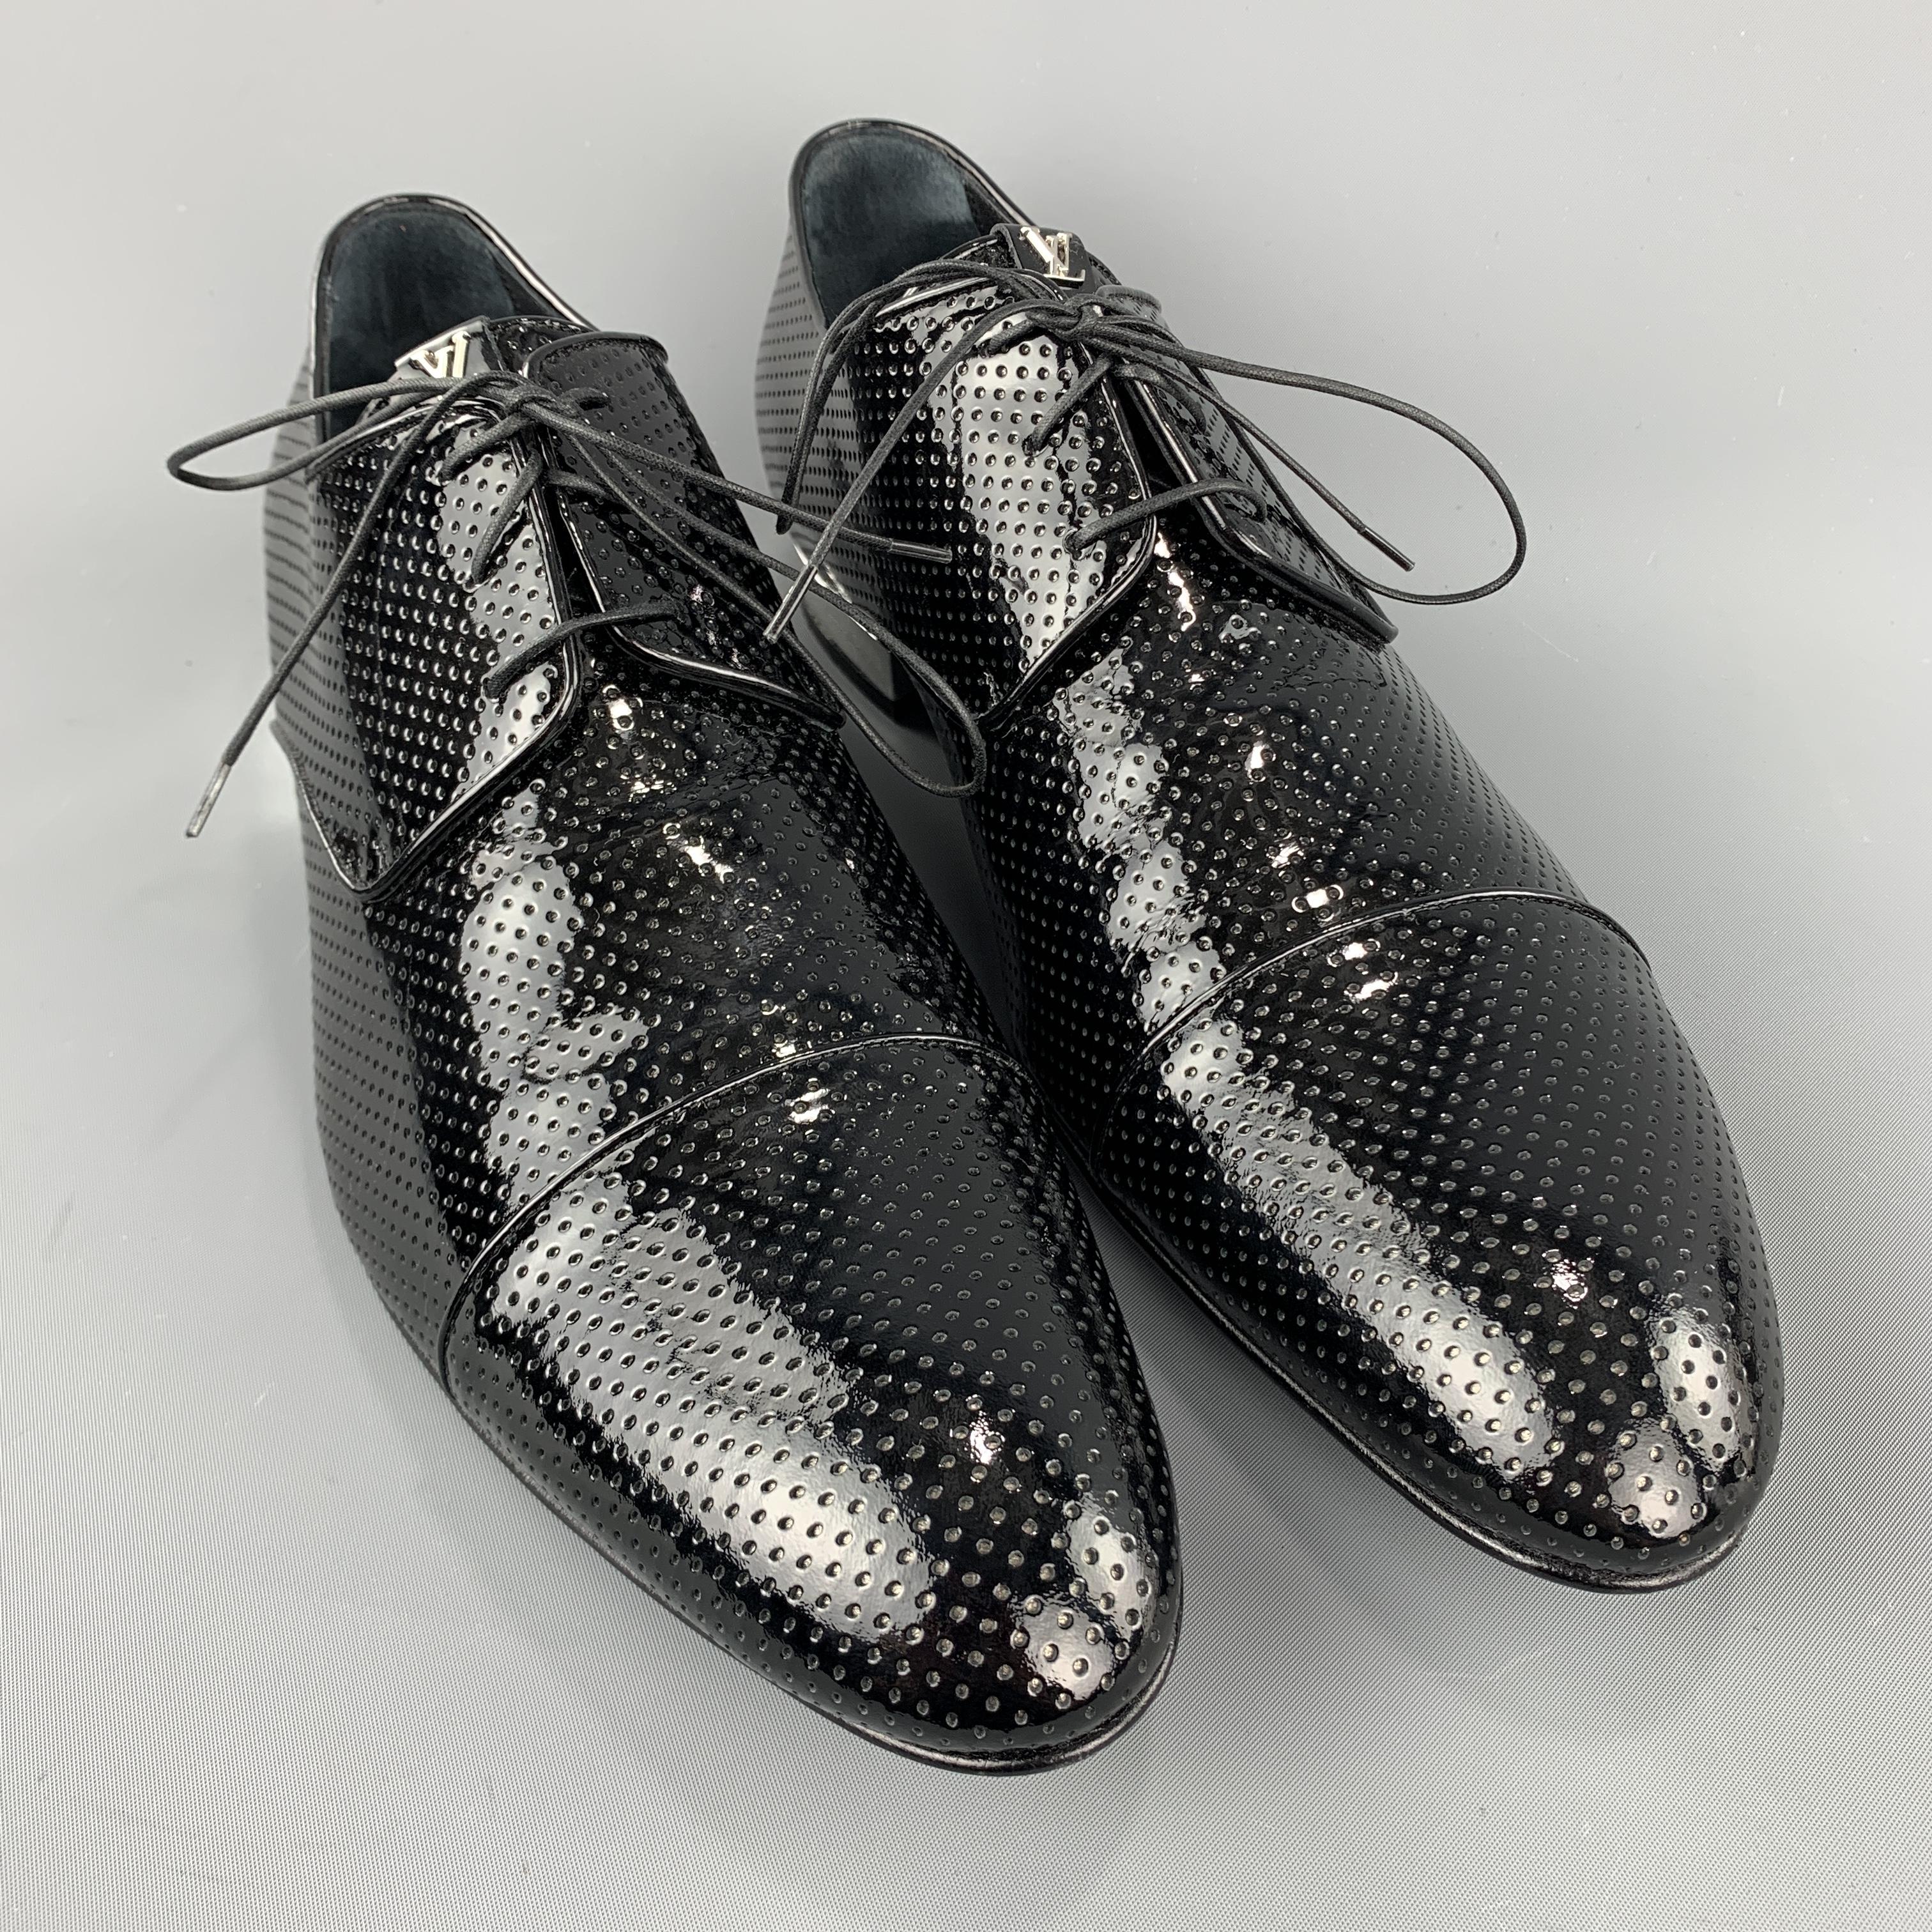 LOUIS VUITTON lace up shoes comes in a black perforated patent leather featuring a silver tone trim detail and a wooden heel. Made in Italy

Brand New.
Marked: 10

Outsole: 4 in. x 12.5 in.